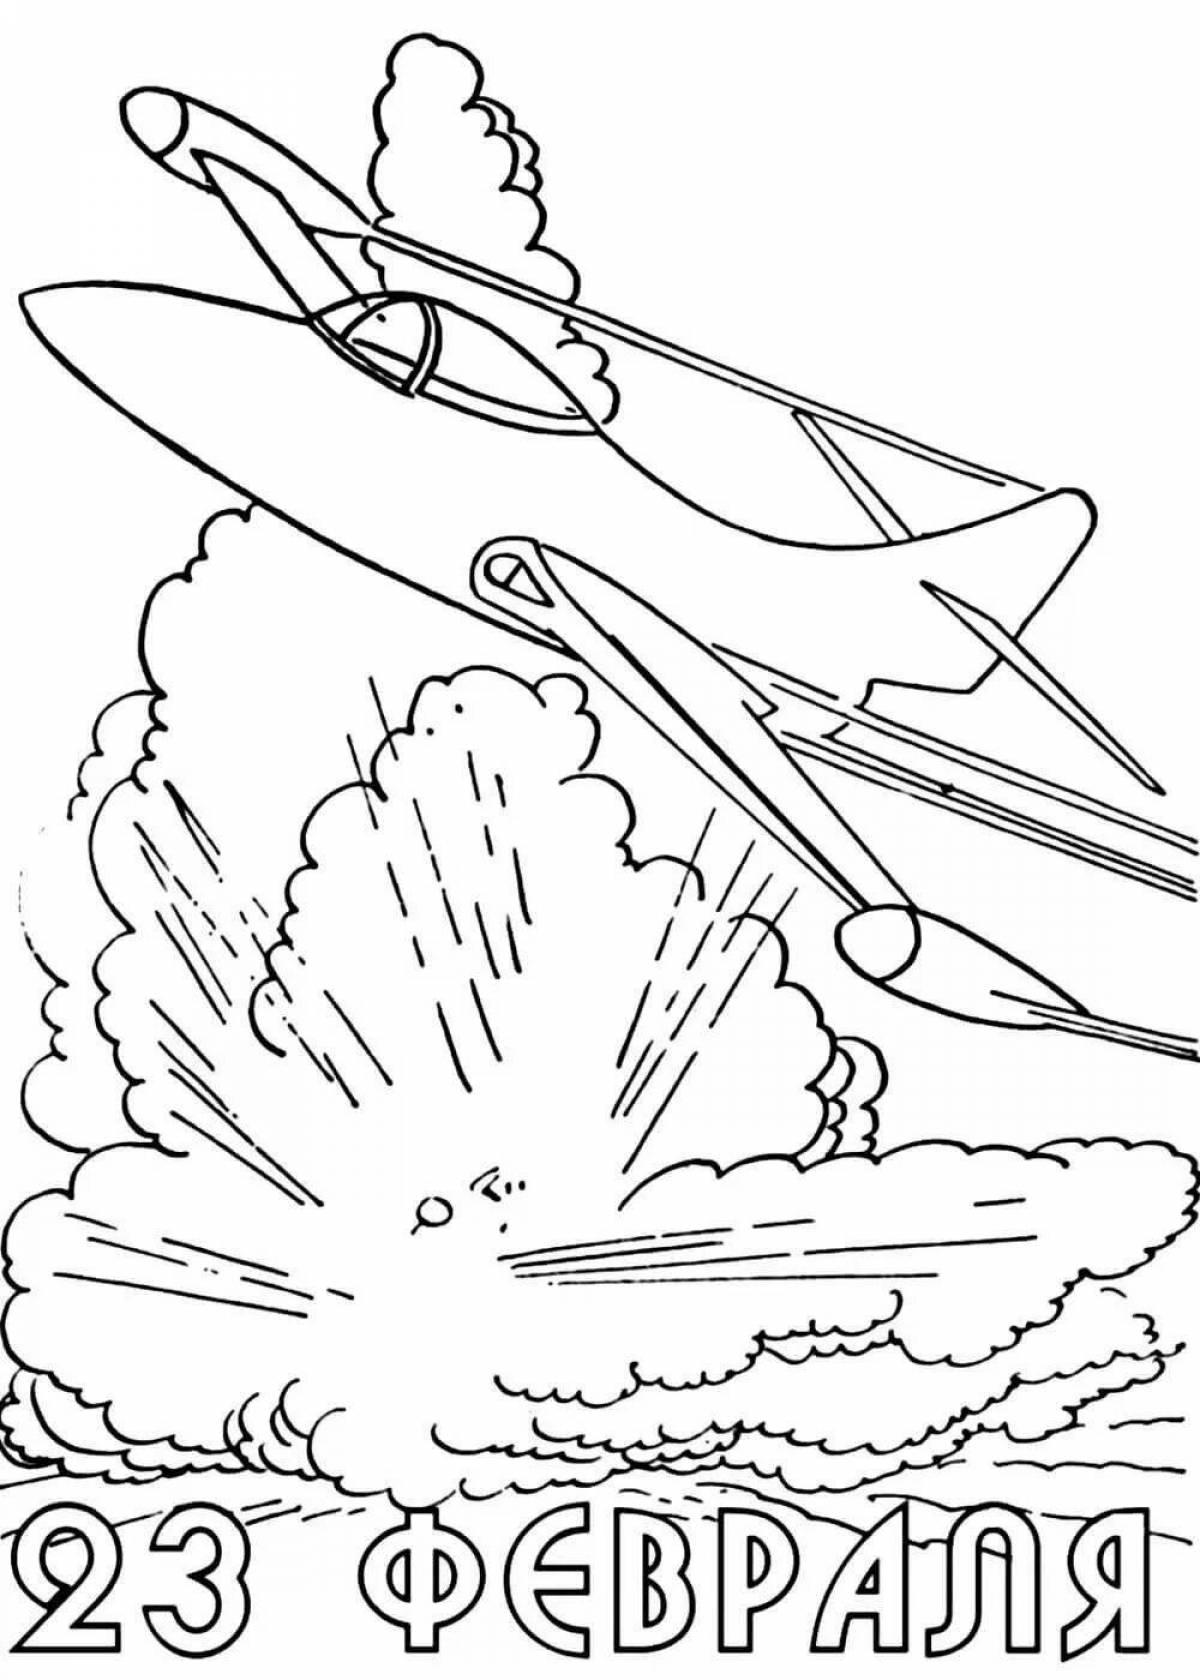 Awesome Defender of the Fatherland Day coloring book